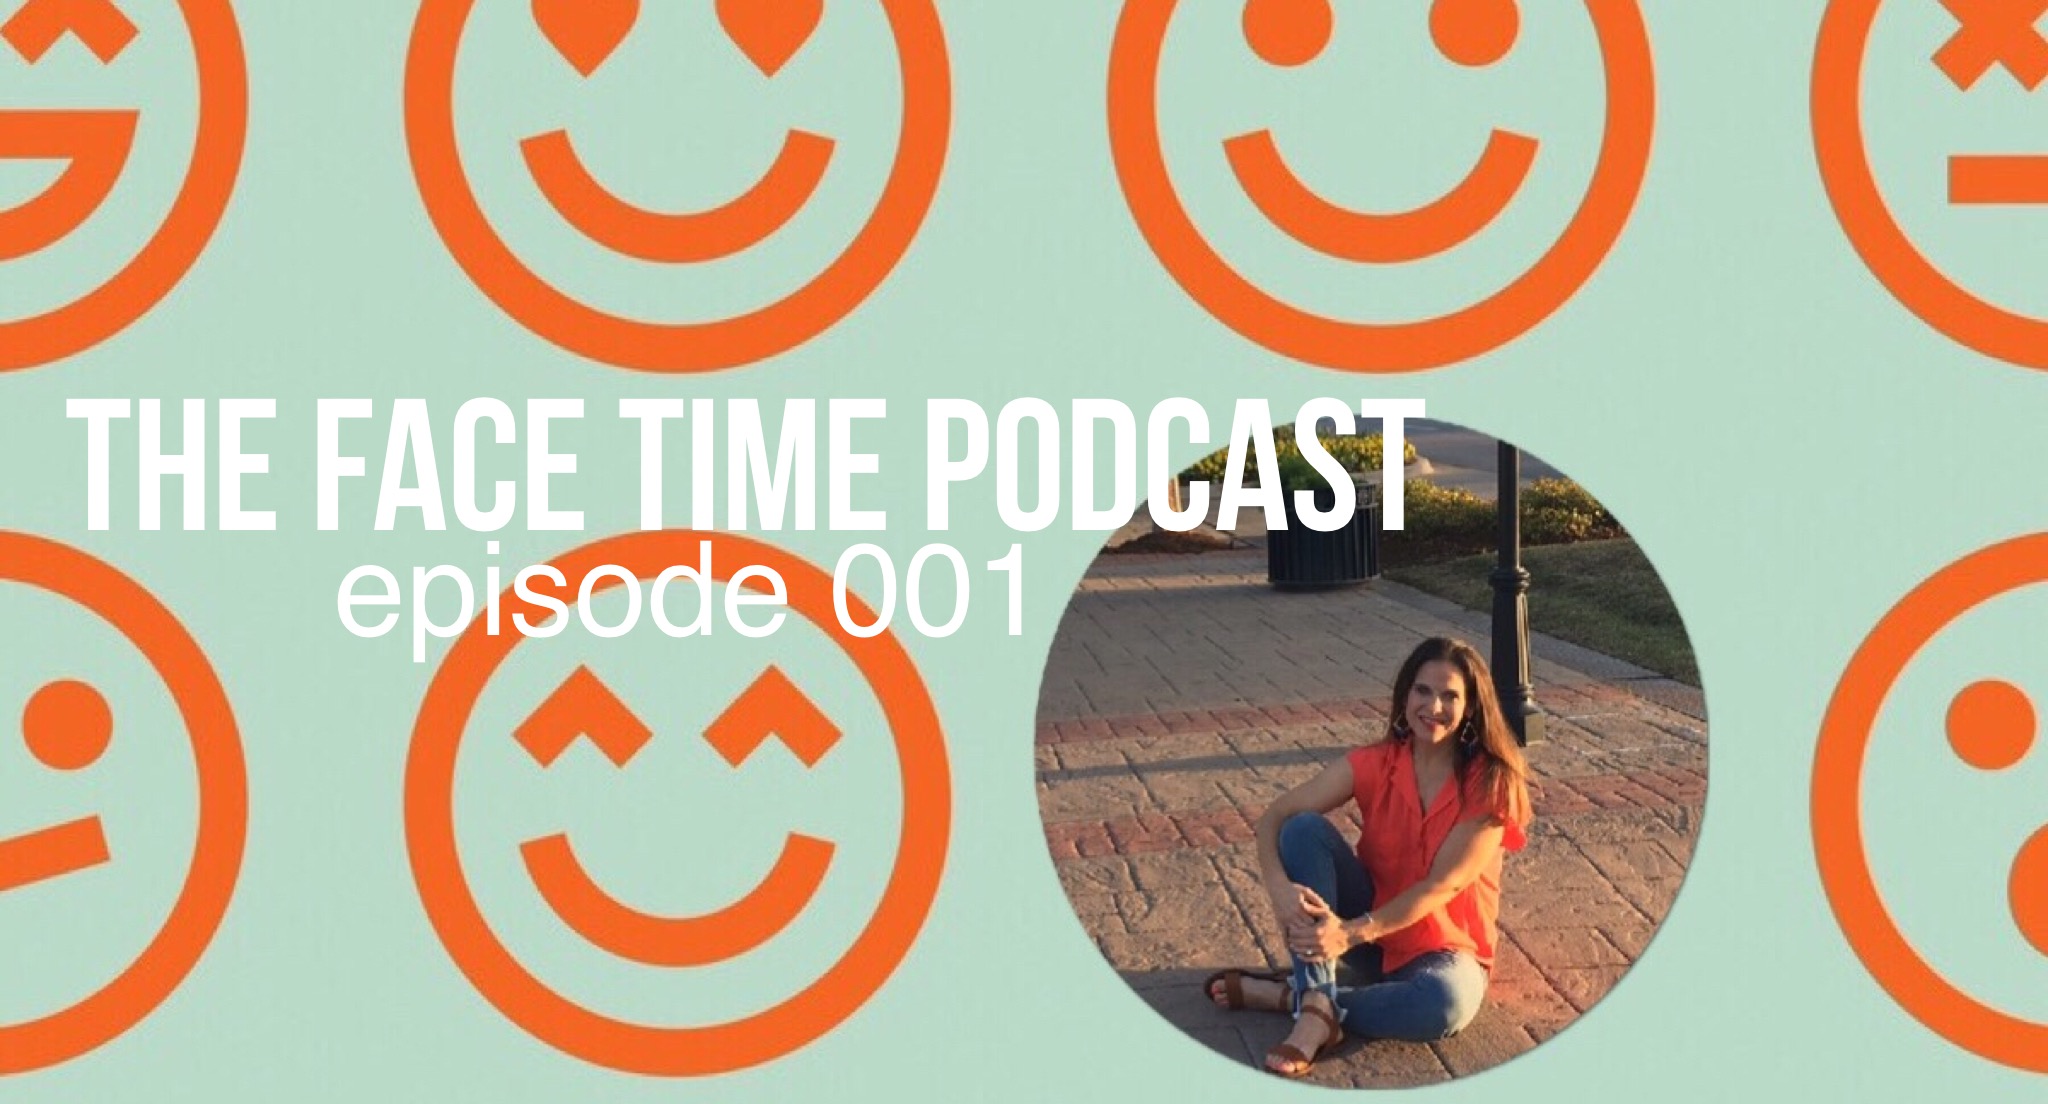 Face Time Podcast Episode 001: Trying to Be Good Enough with Martha Kate Stainsby